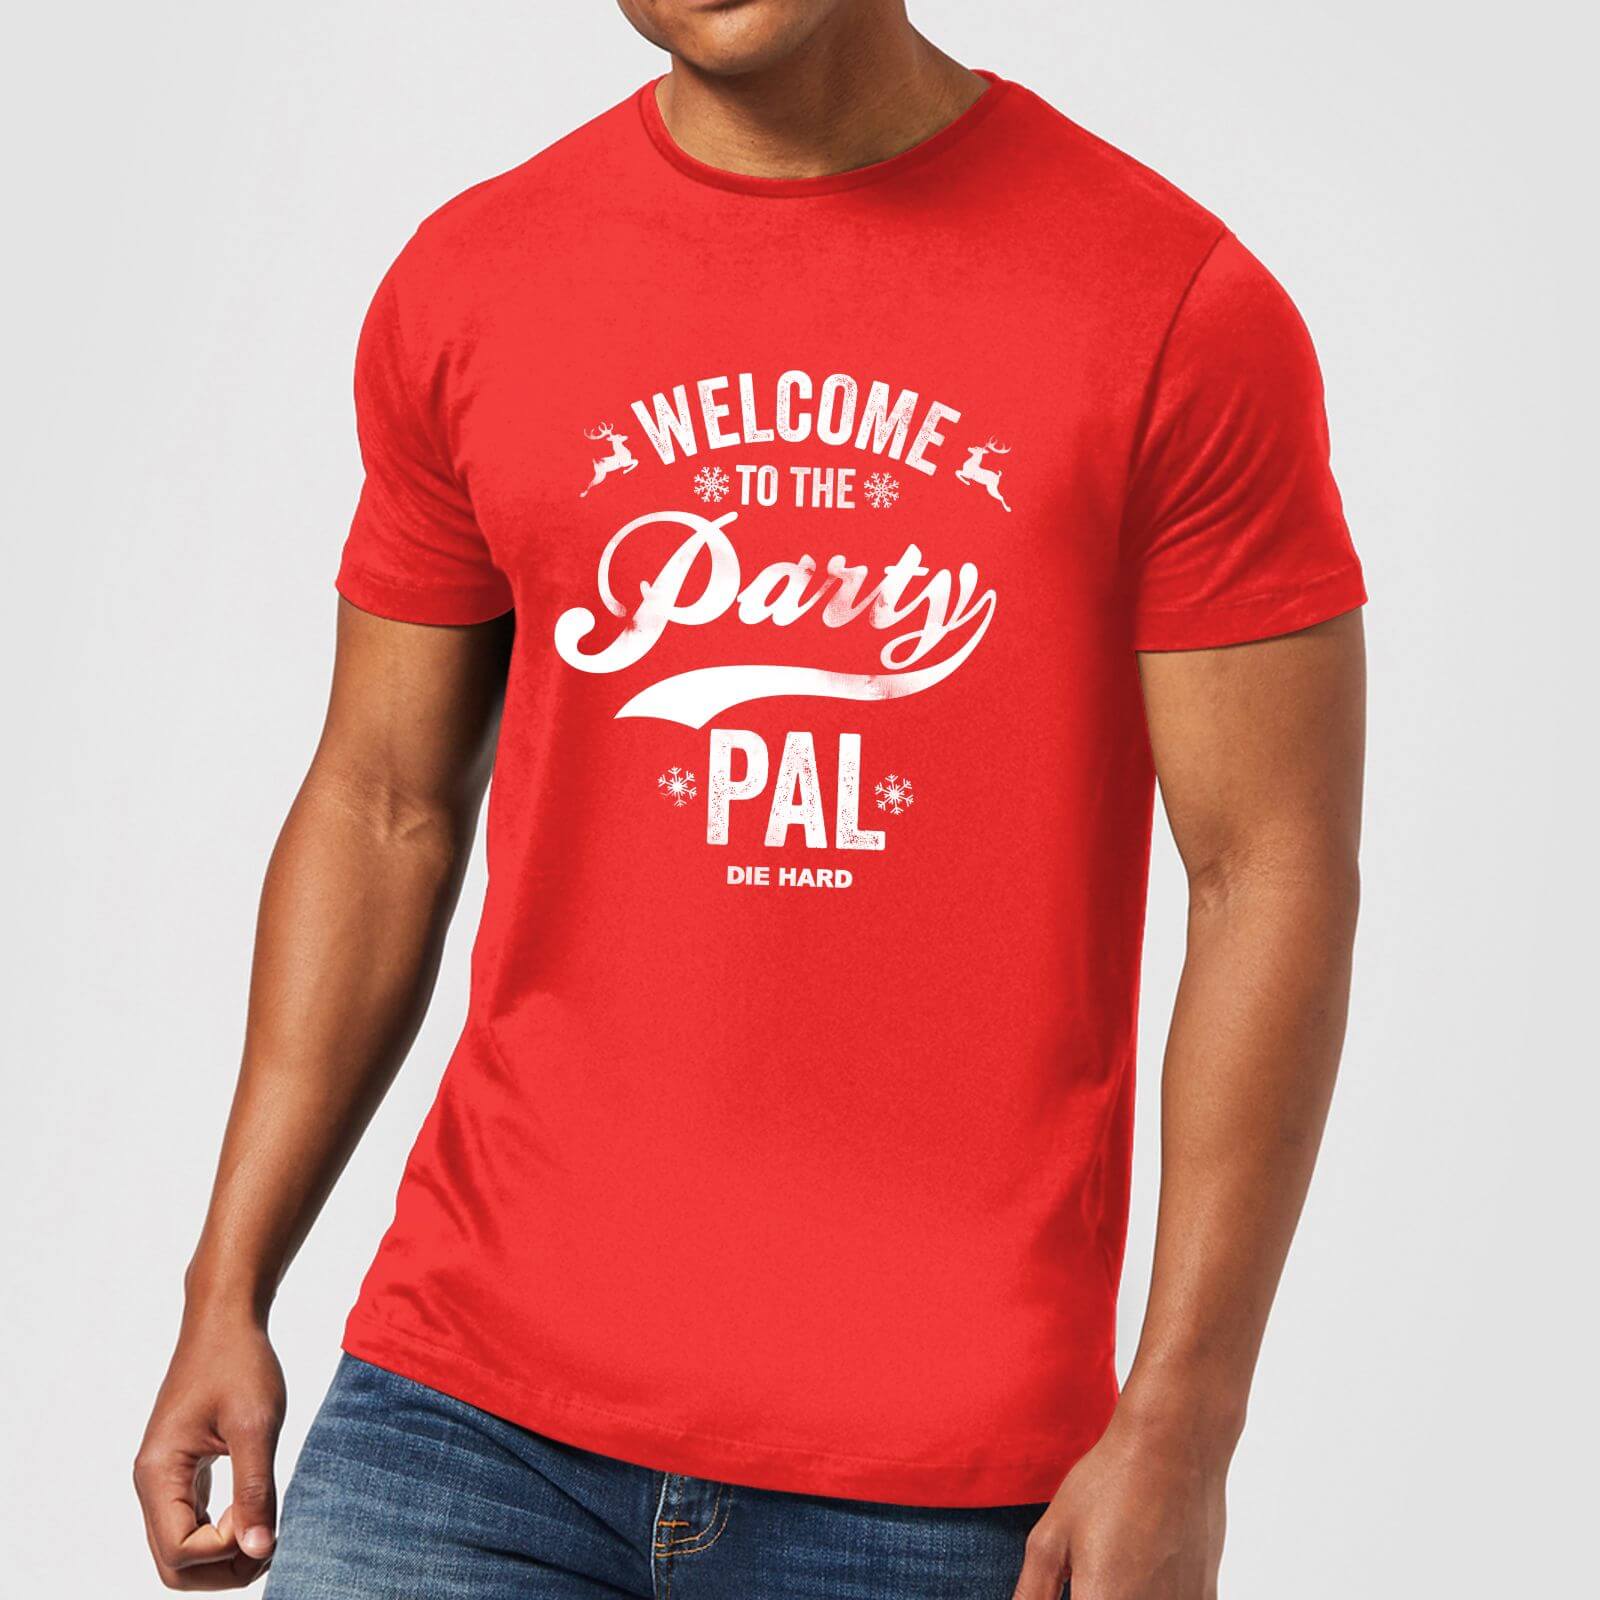 red party shirt